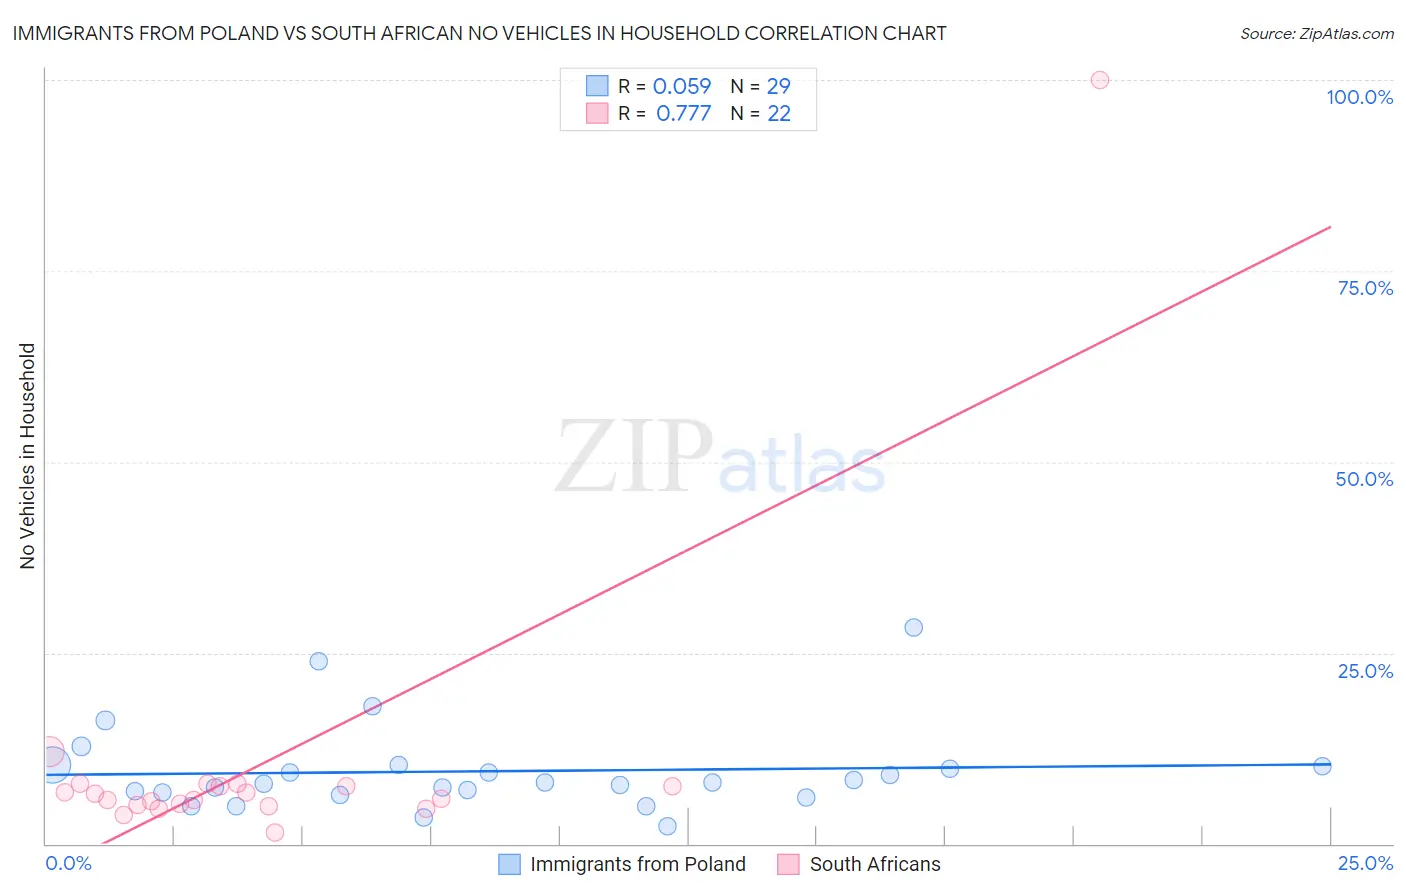 Immigrants from Poland vs South African No Vehicles in Household